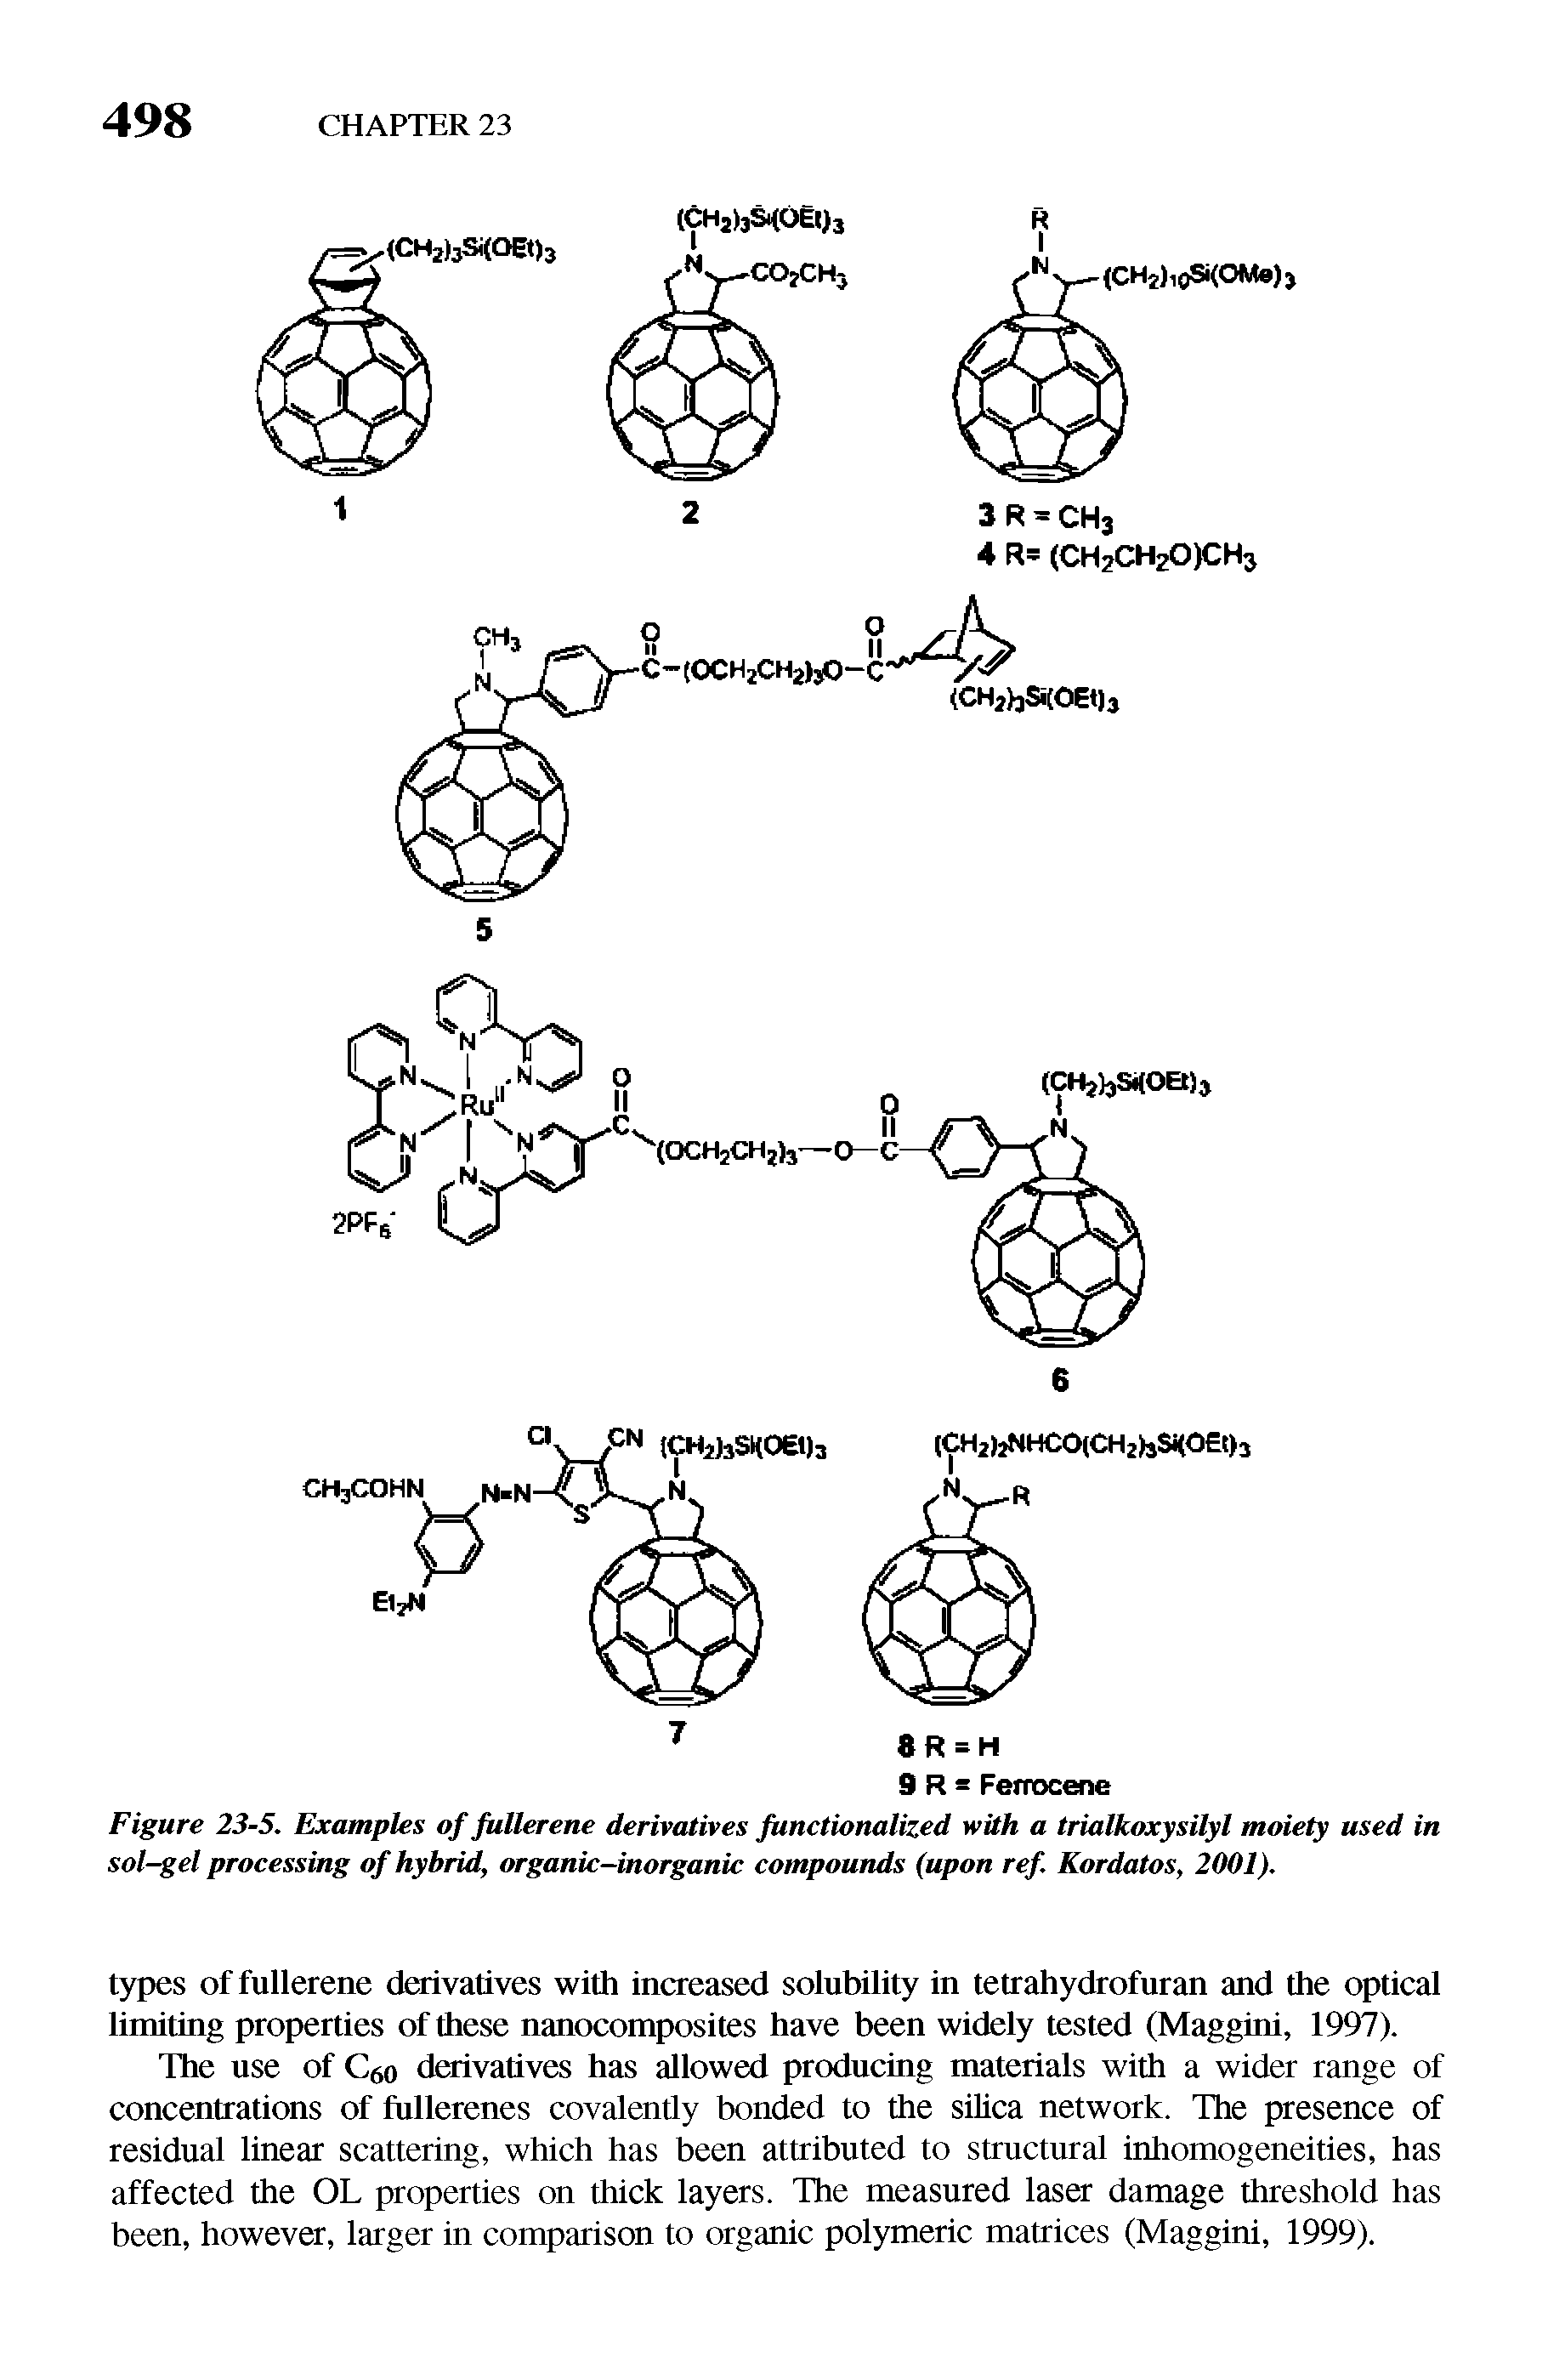 Figure 23-5. Examples of fullerene derivatives functionalized with a trialkoxysilyl moiety used in sol-gel processing of hybrid, organic-inorganic compounds (upon ref Kordatos, 2001).